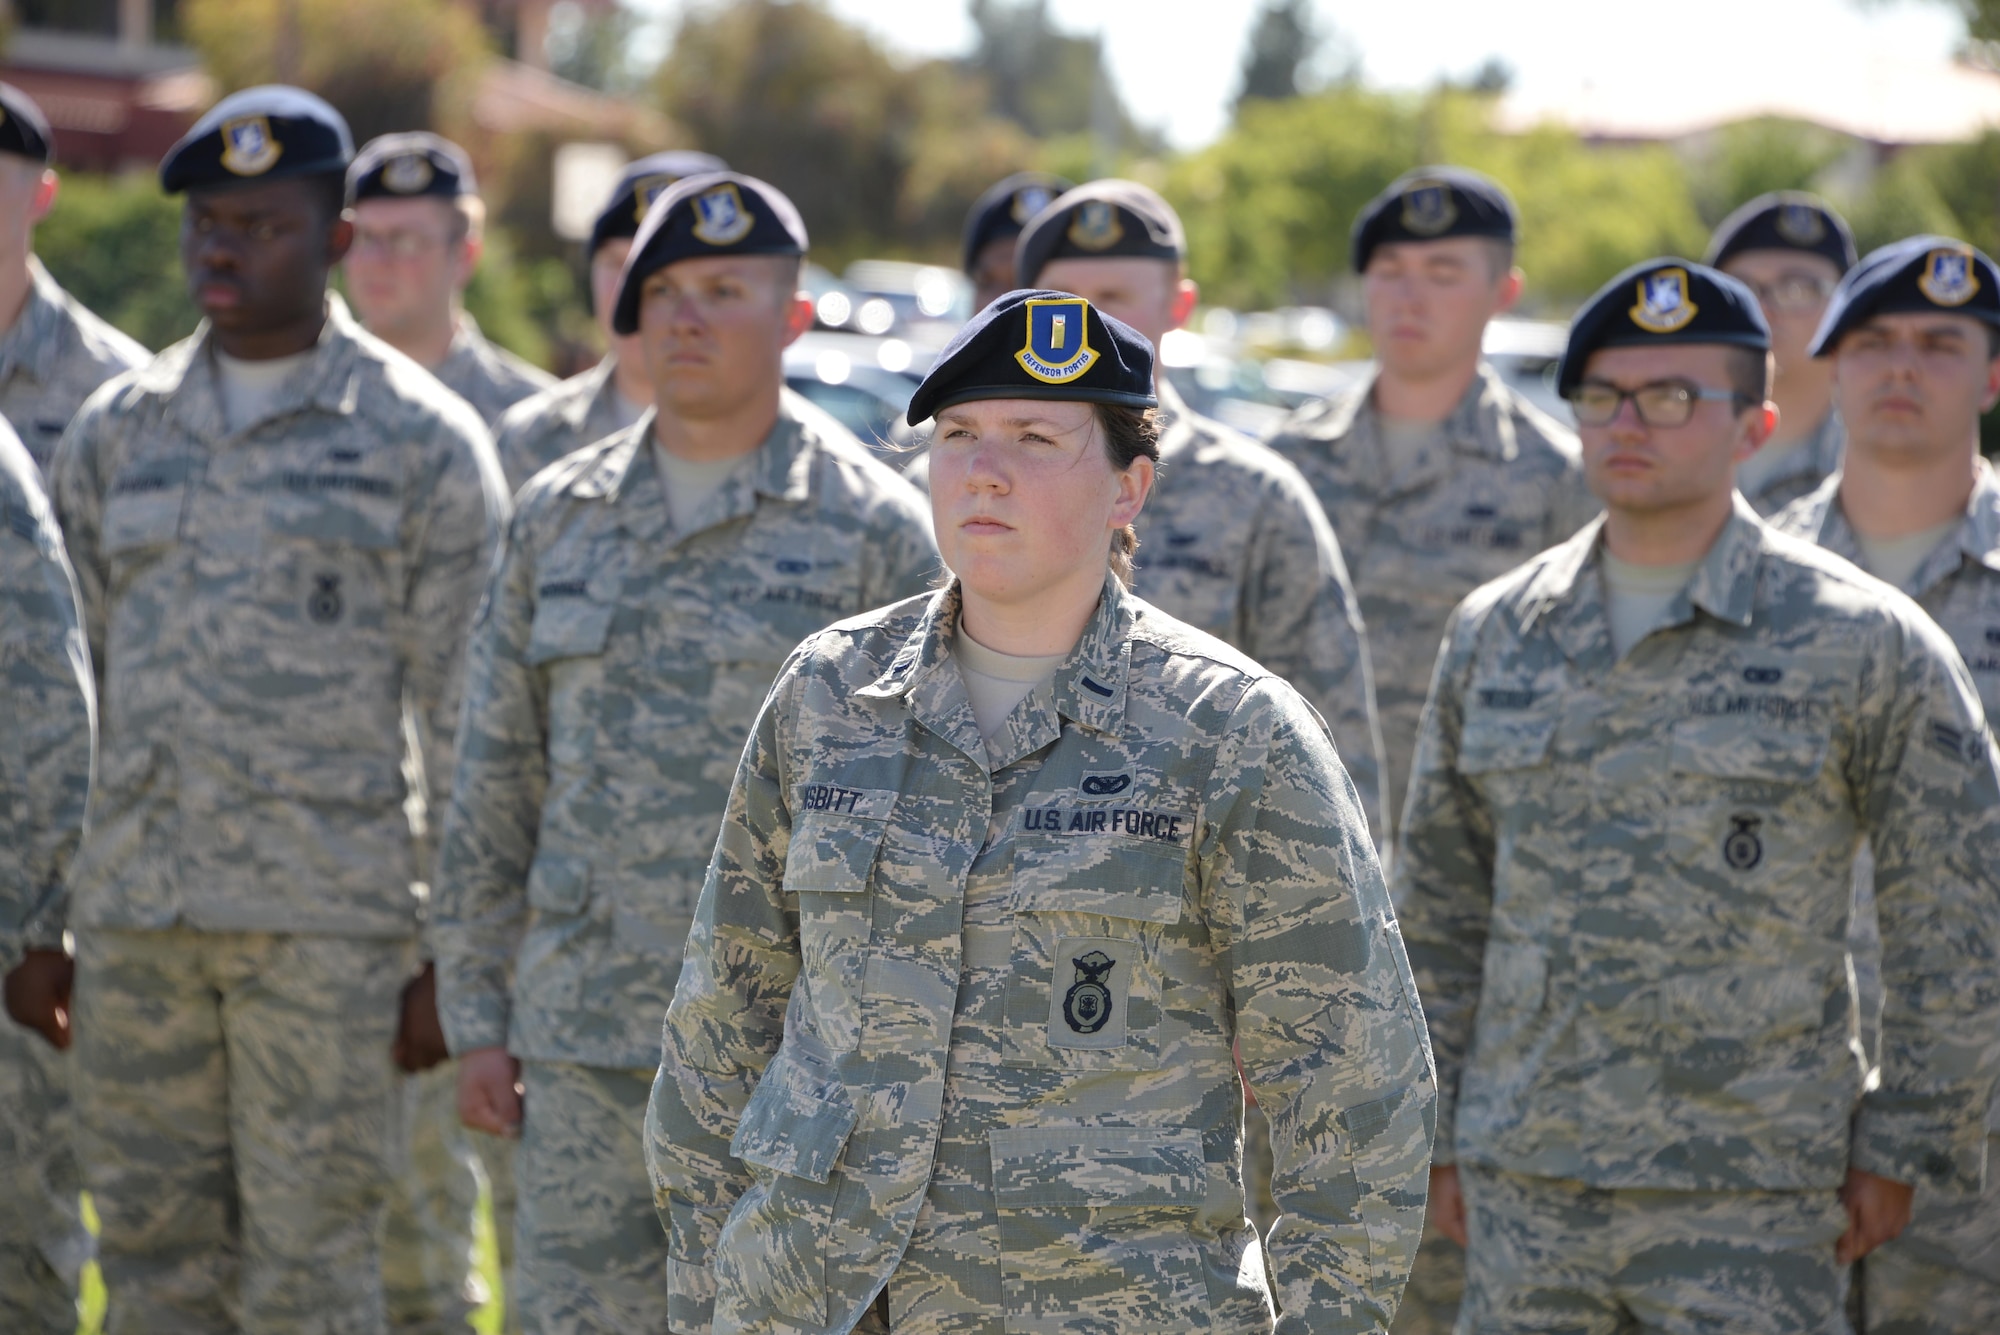 1 st Lt. Adrienne Nesbitt, 60th Security Forces Squadron, leads a formation of defenders during a retreat ceremony featuring security forces Airmen to close Police Week May 18, 2017 at Travis Air Force Base, Calif. Established by a joint resolution of Congress in 1962, National Police Week pays special recognition to law enforcement officers who have lost their lives in the line of duty for the safety and protection of others. Police Week gives the 60th SFS an opportunity to inform, educate and strengthen Travis community relations. (U.S. Air Force photo/Tech. Sgt. James Hodgman) 